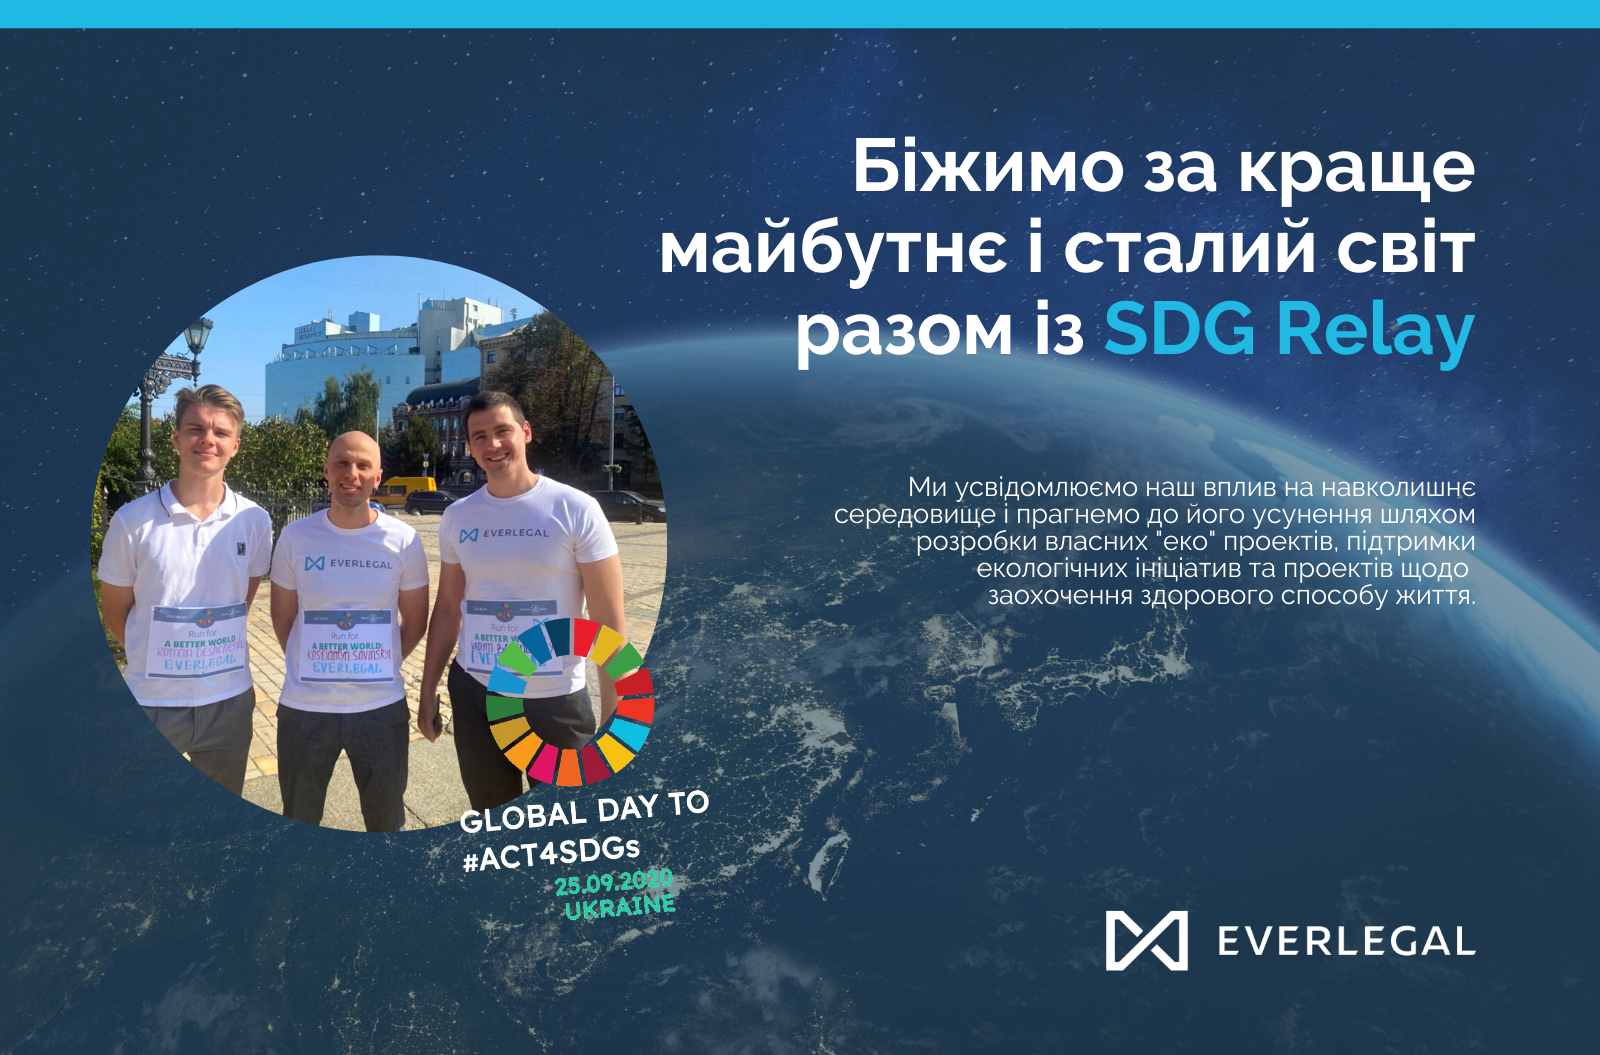 Running for a better future and a sustainable world together with SDG Relay